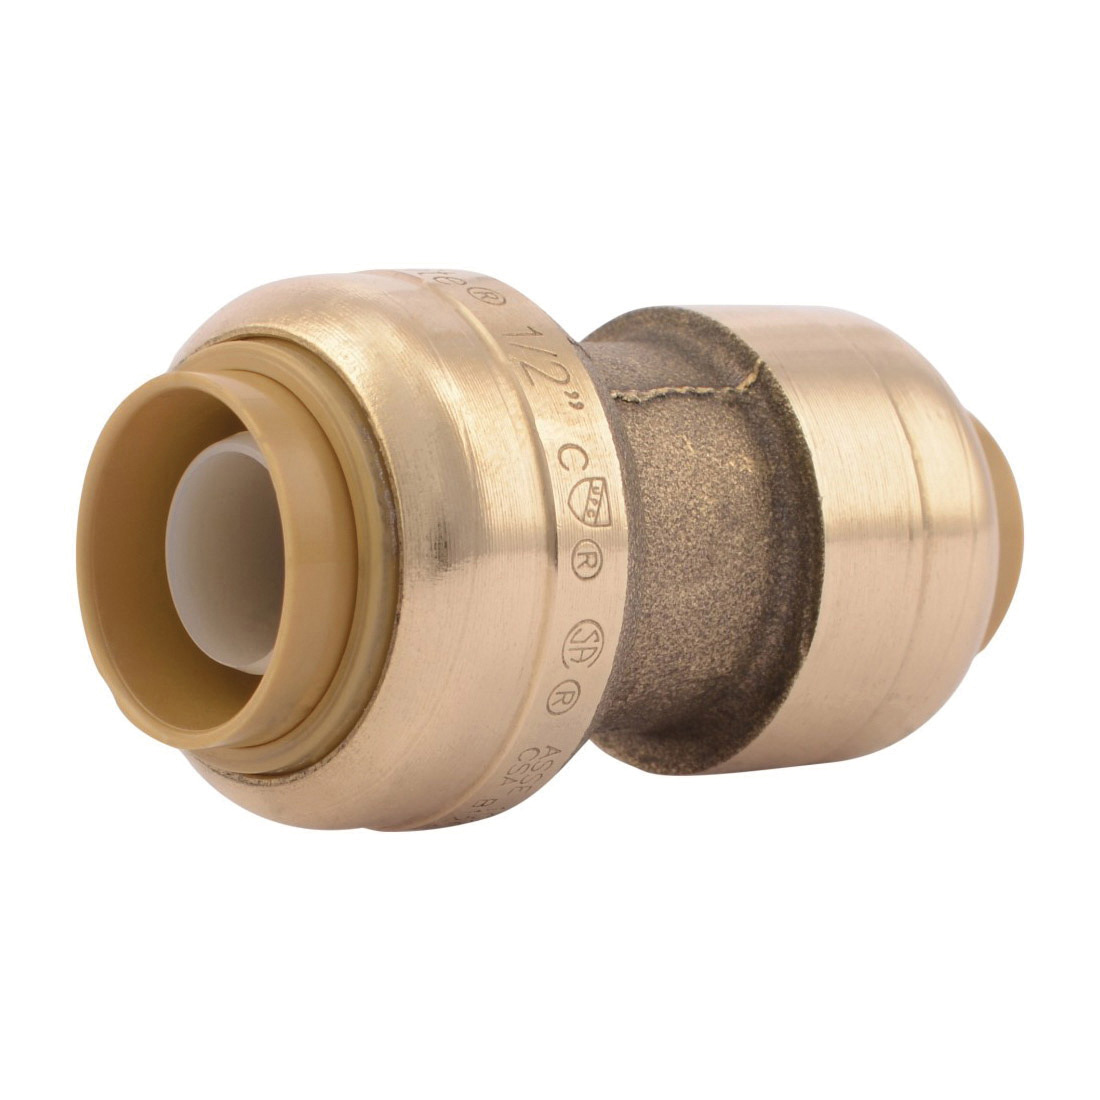 Sharkbite® U009LF Pipe Reducing Coupling, 3/8 x 1/2 in Nominal, Push-Fit End Style, Brass, Import